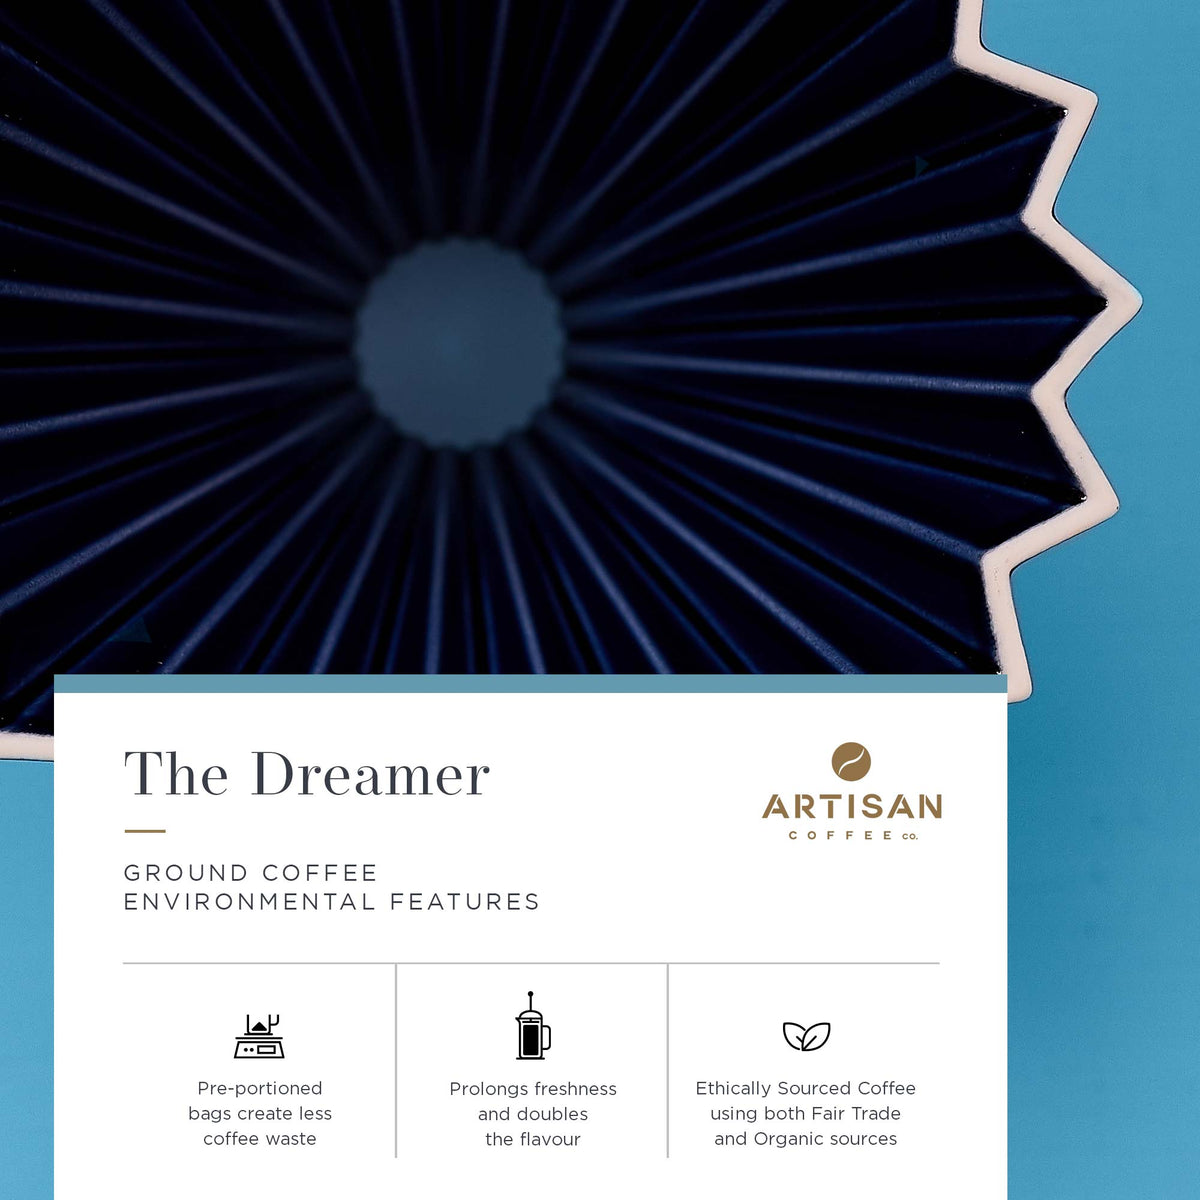 Artisan Coffee Co The Dreamer ground coffee Infographic environmental features